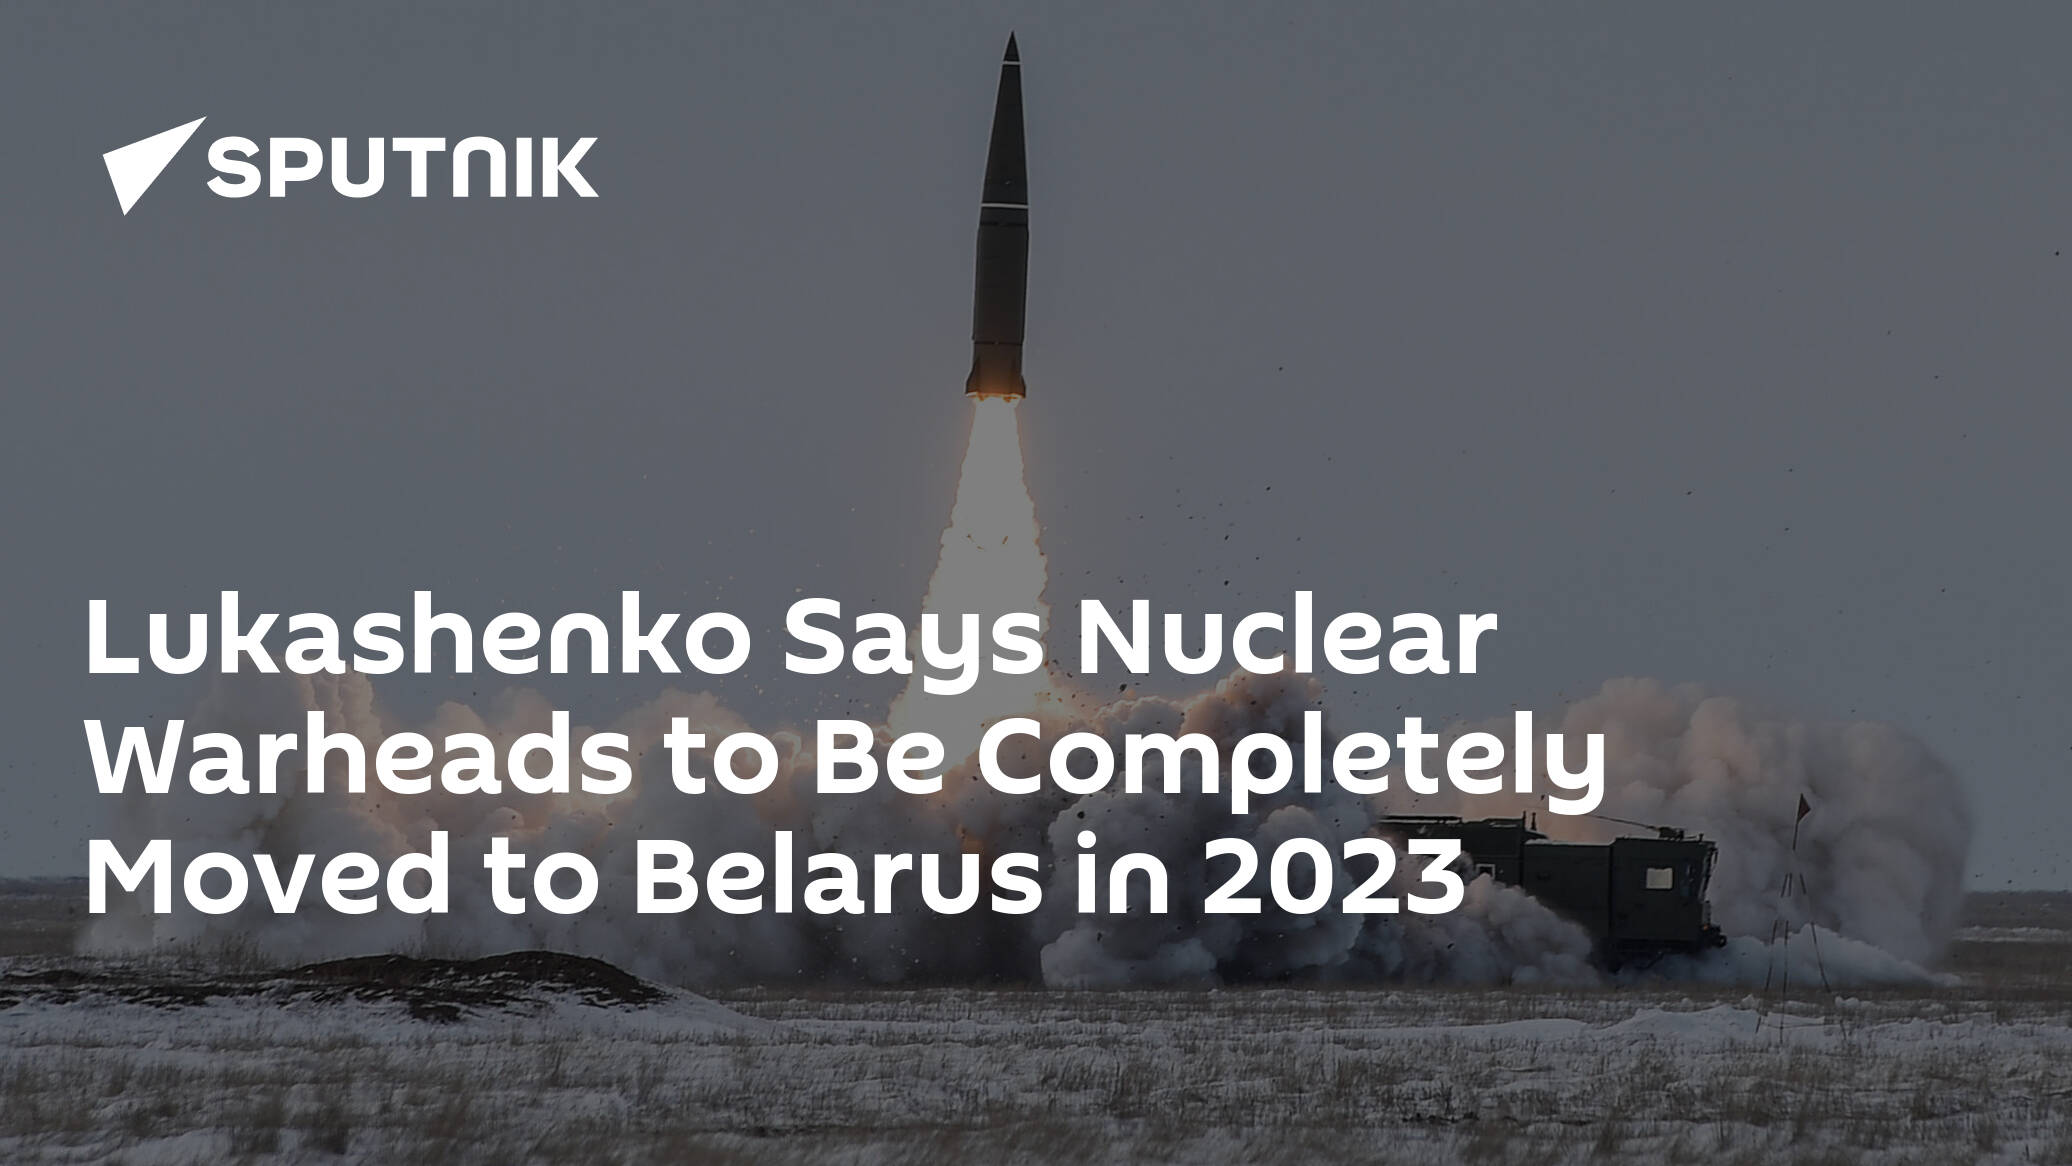 Lukashenko Says Nuclear Warheads to Be Completely Moved to Belarus in 2023